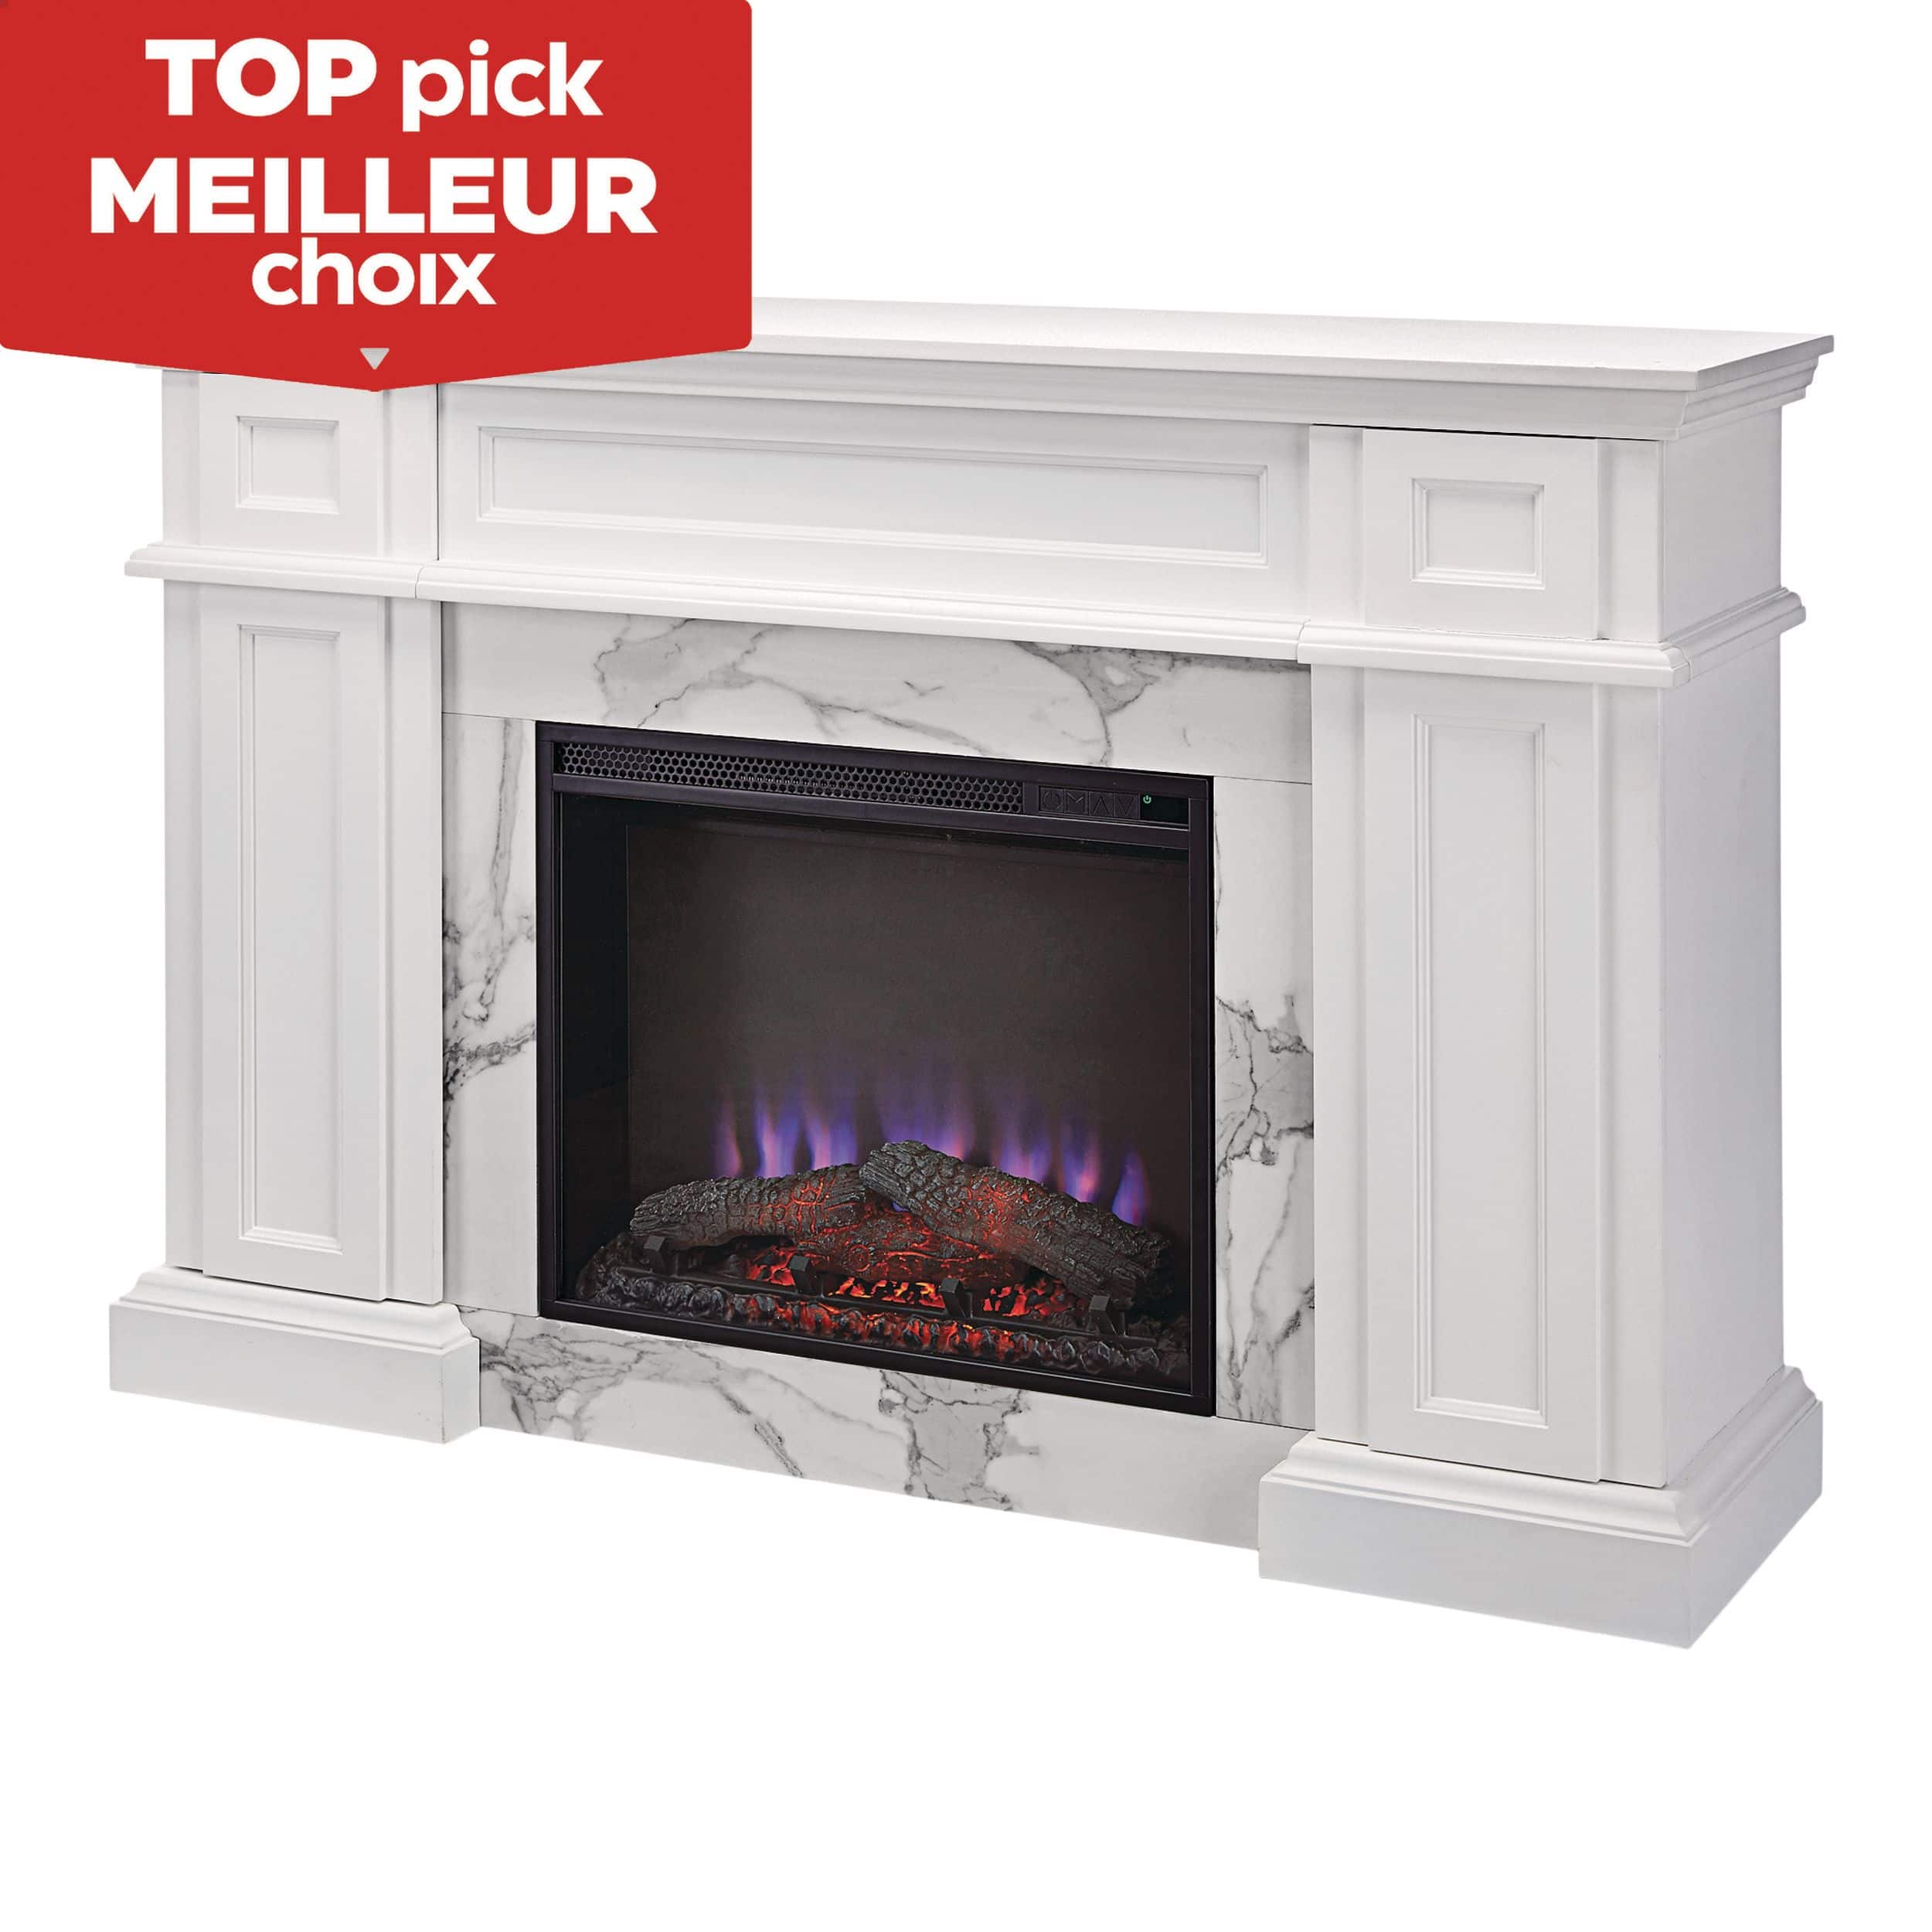 CANVAS Marseille Mantle Fireplace, 54-in, 1500W, Includes Remote